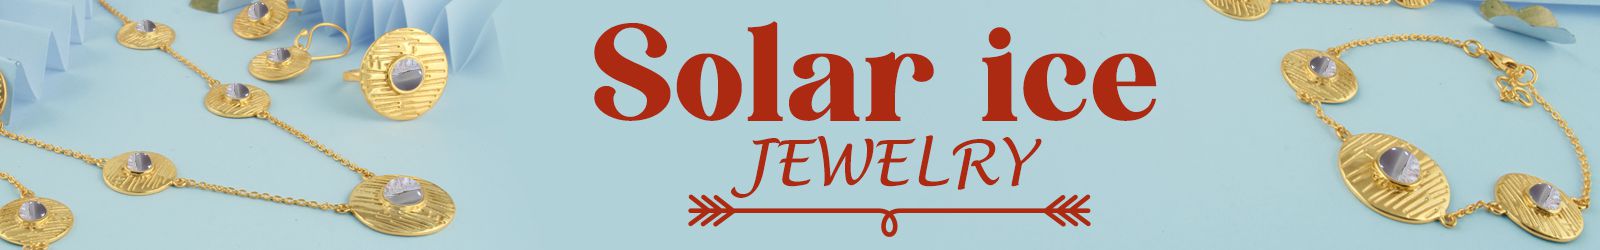 Silver Solar Ice Jewelry Wholesale Supplier